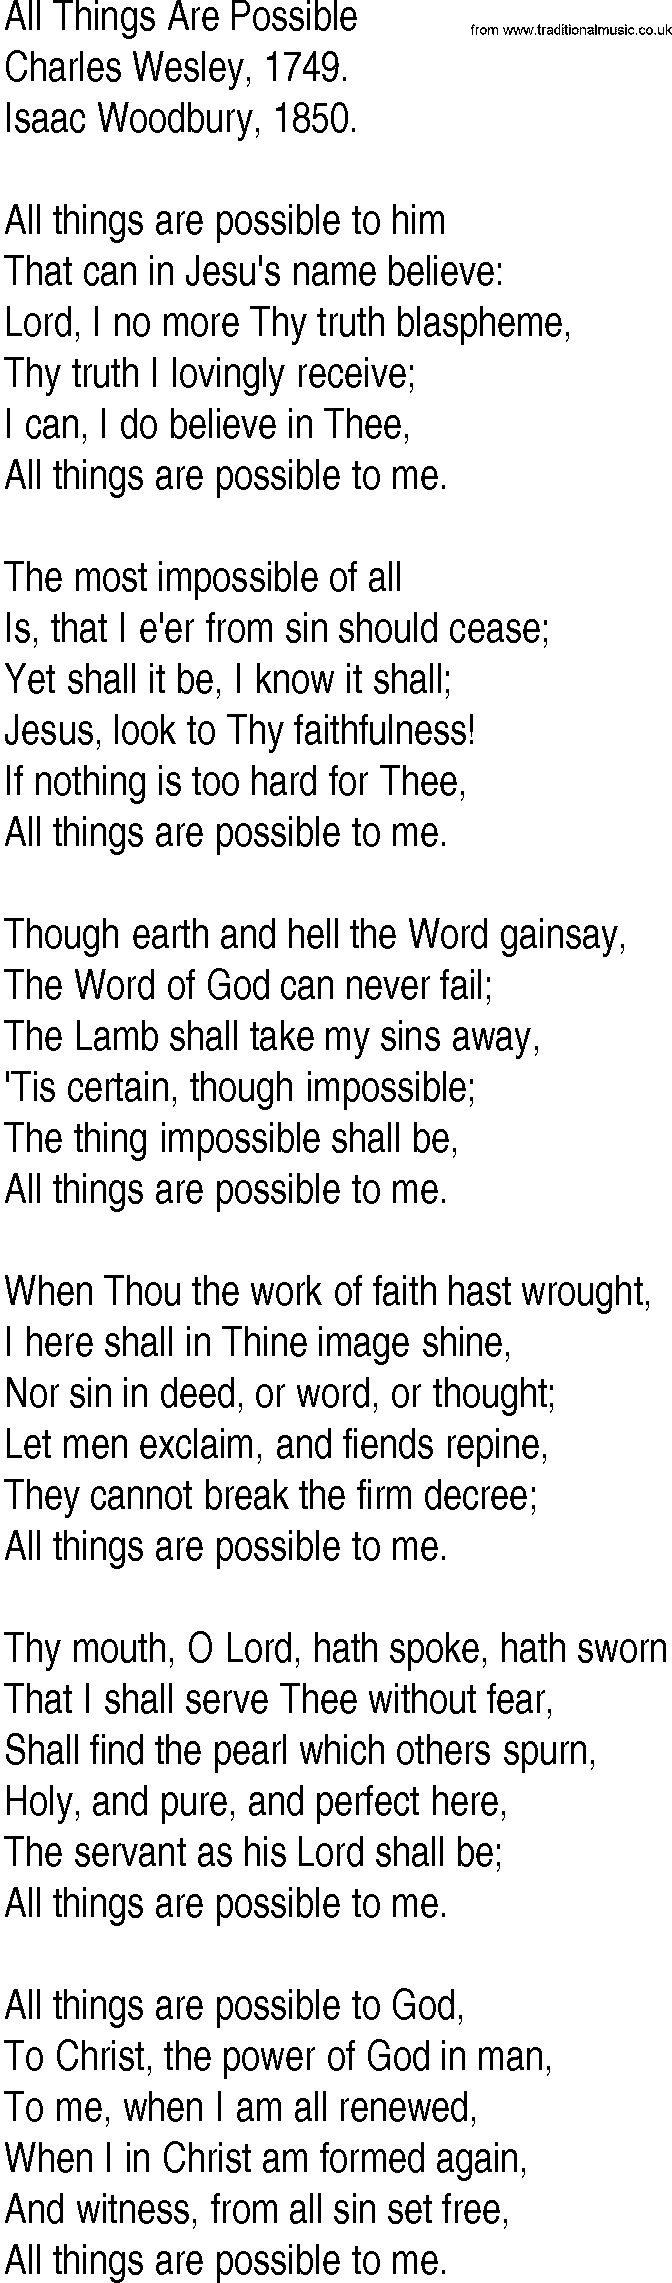 Hymn and Gospel Song: All Things Are Possible by Charles Wesley lyrics